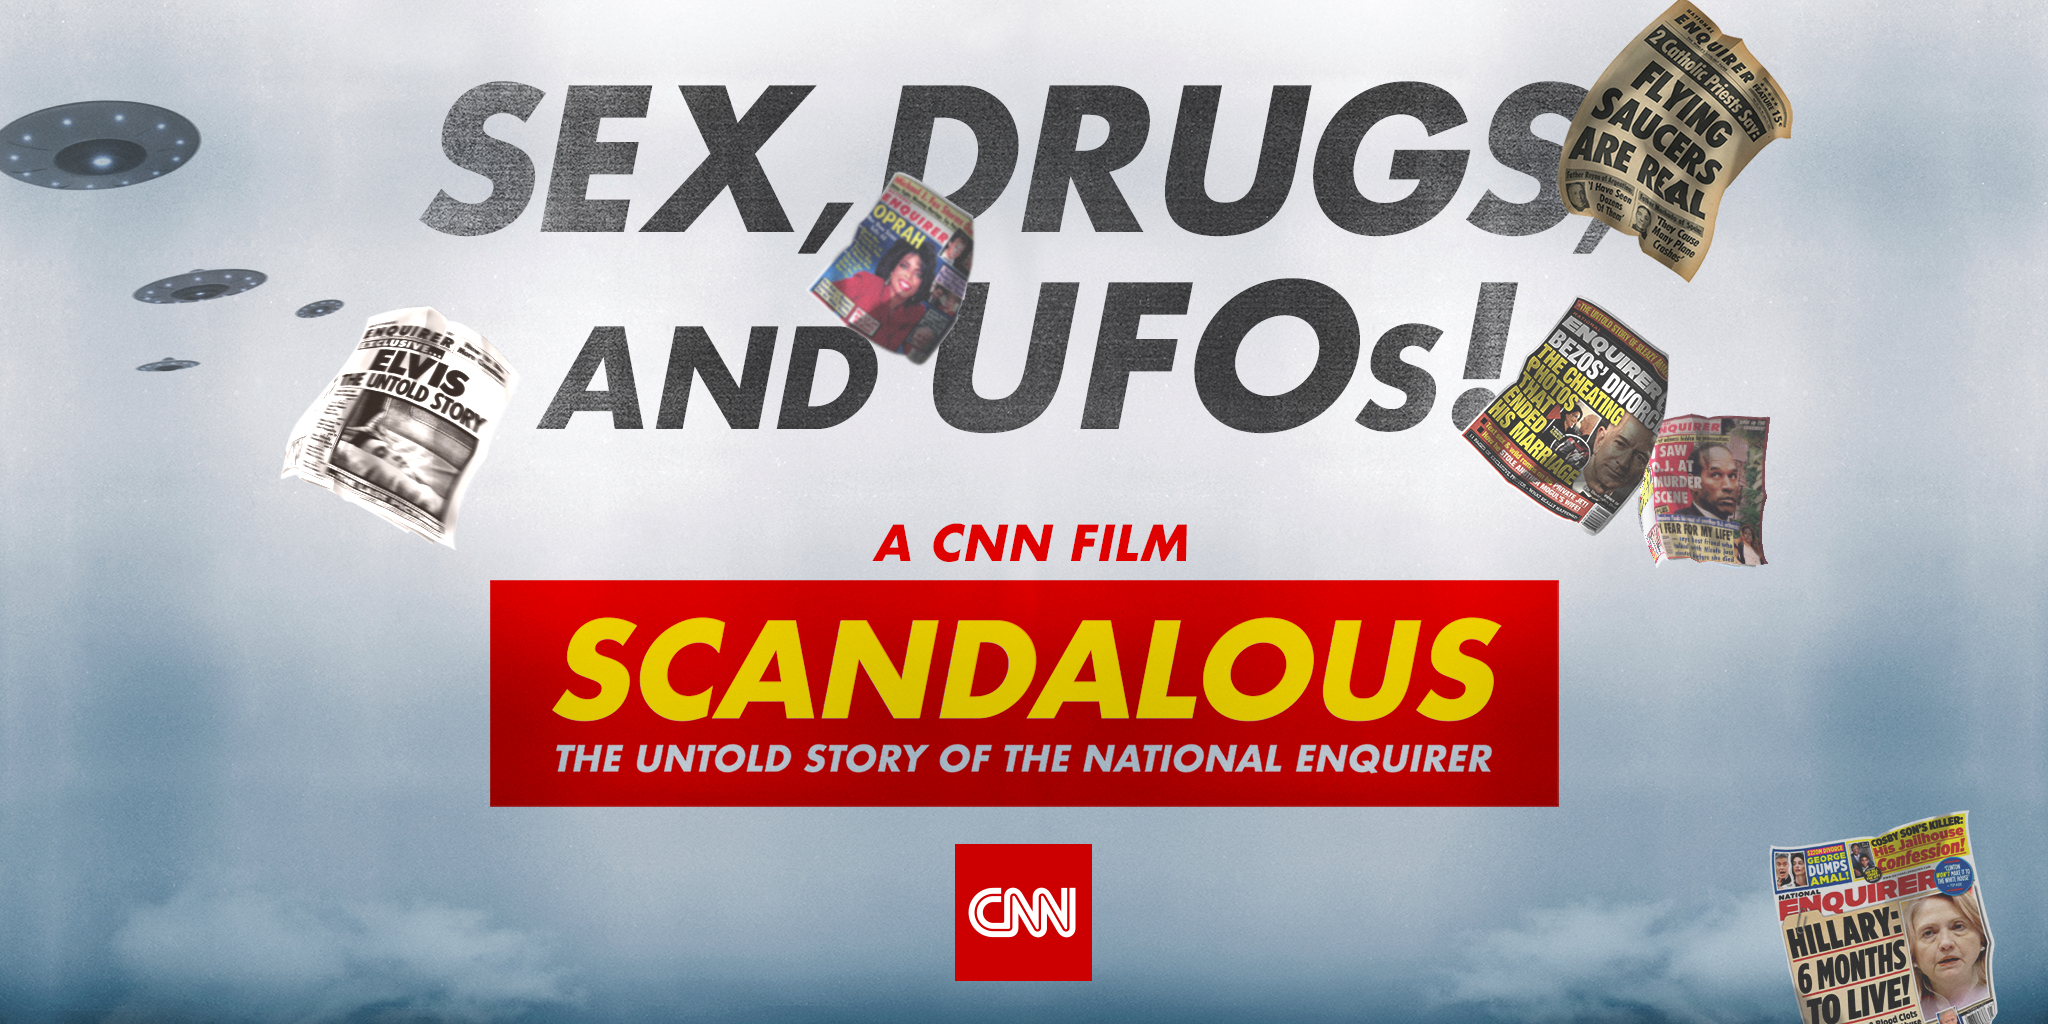 CNN Films premieres the Mark Landsman-directed documentary SCANDALOUS The Untold Story of the National Enquirer Sunday